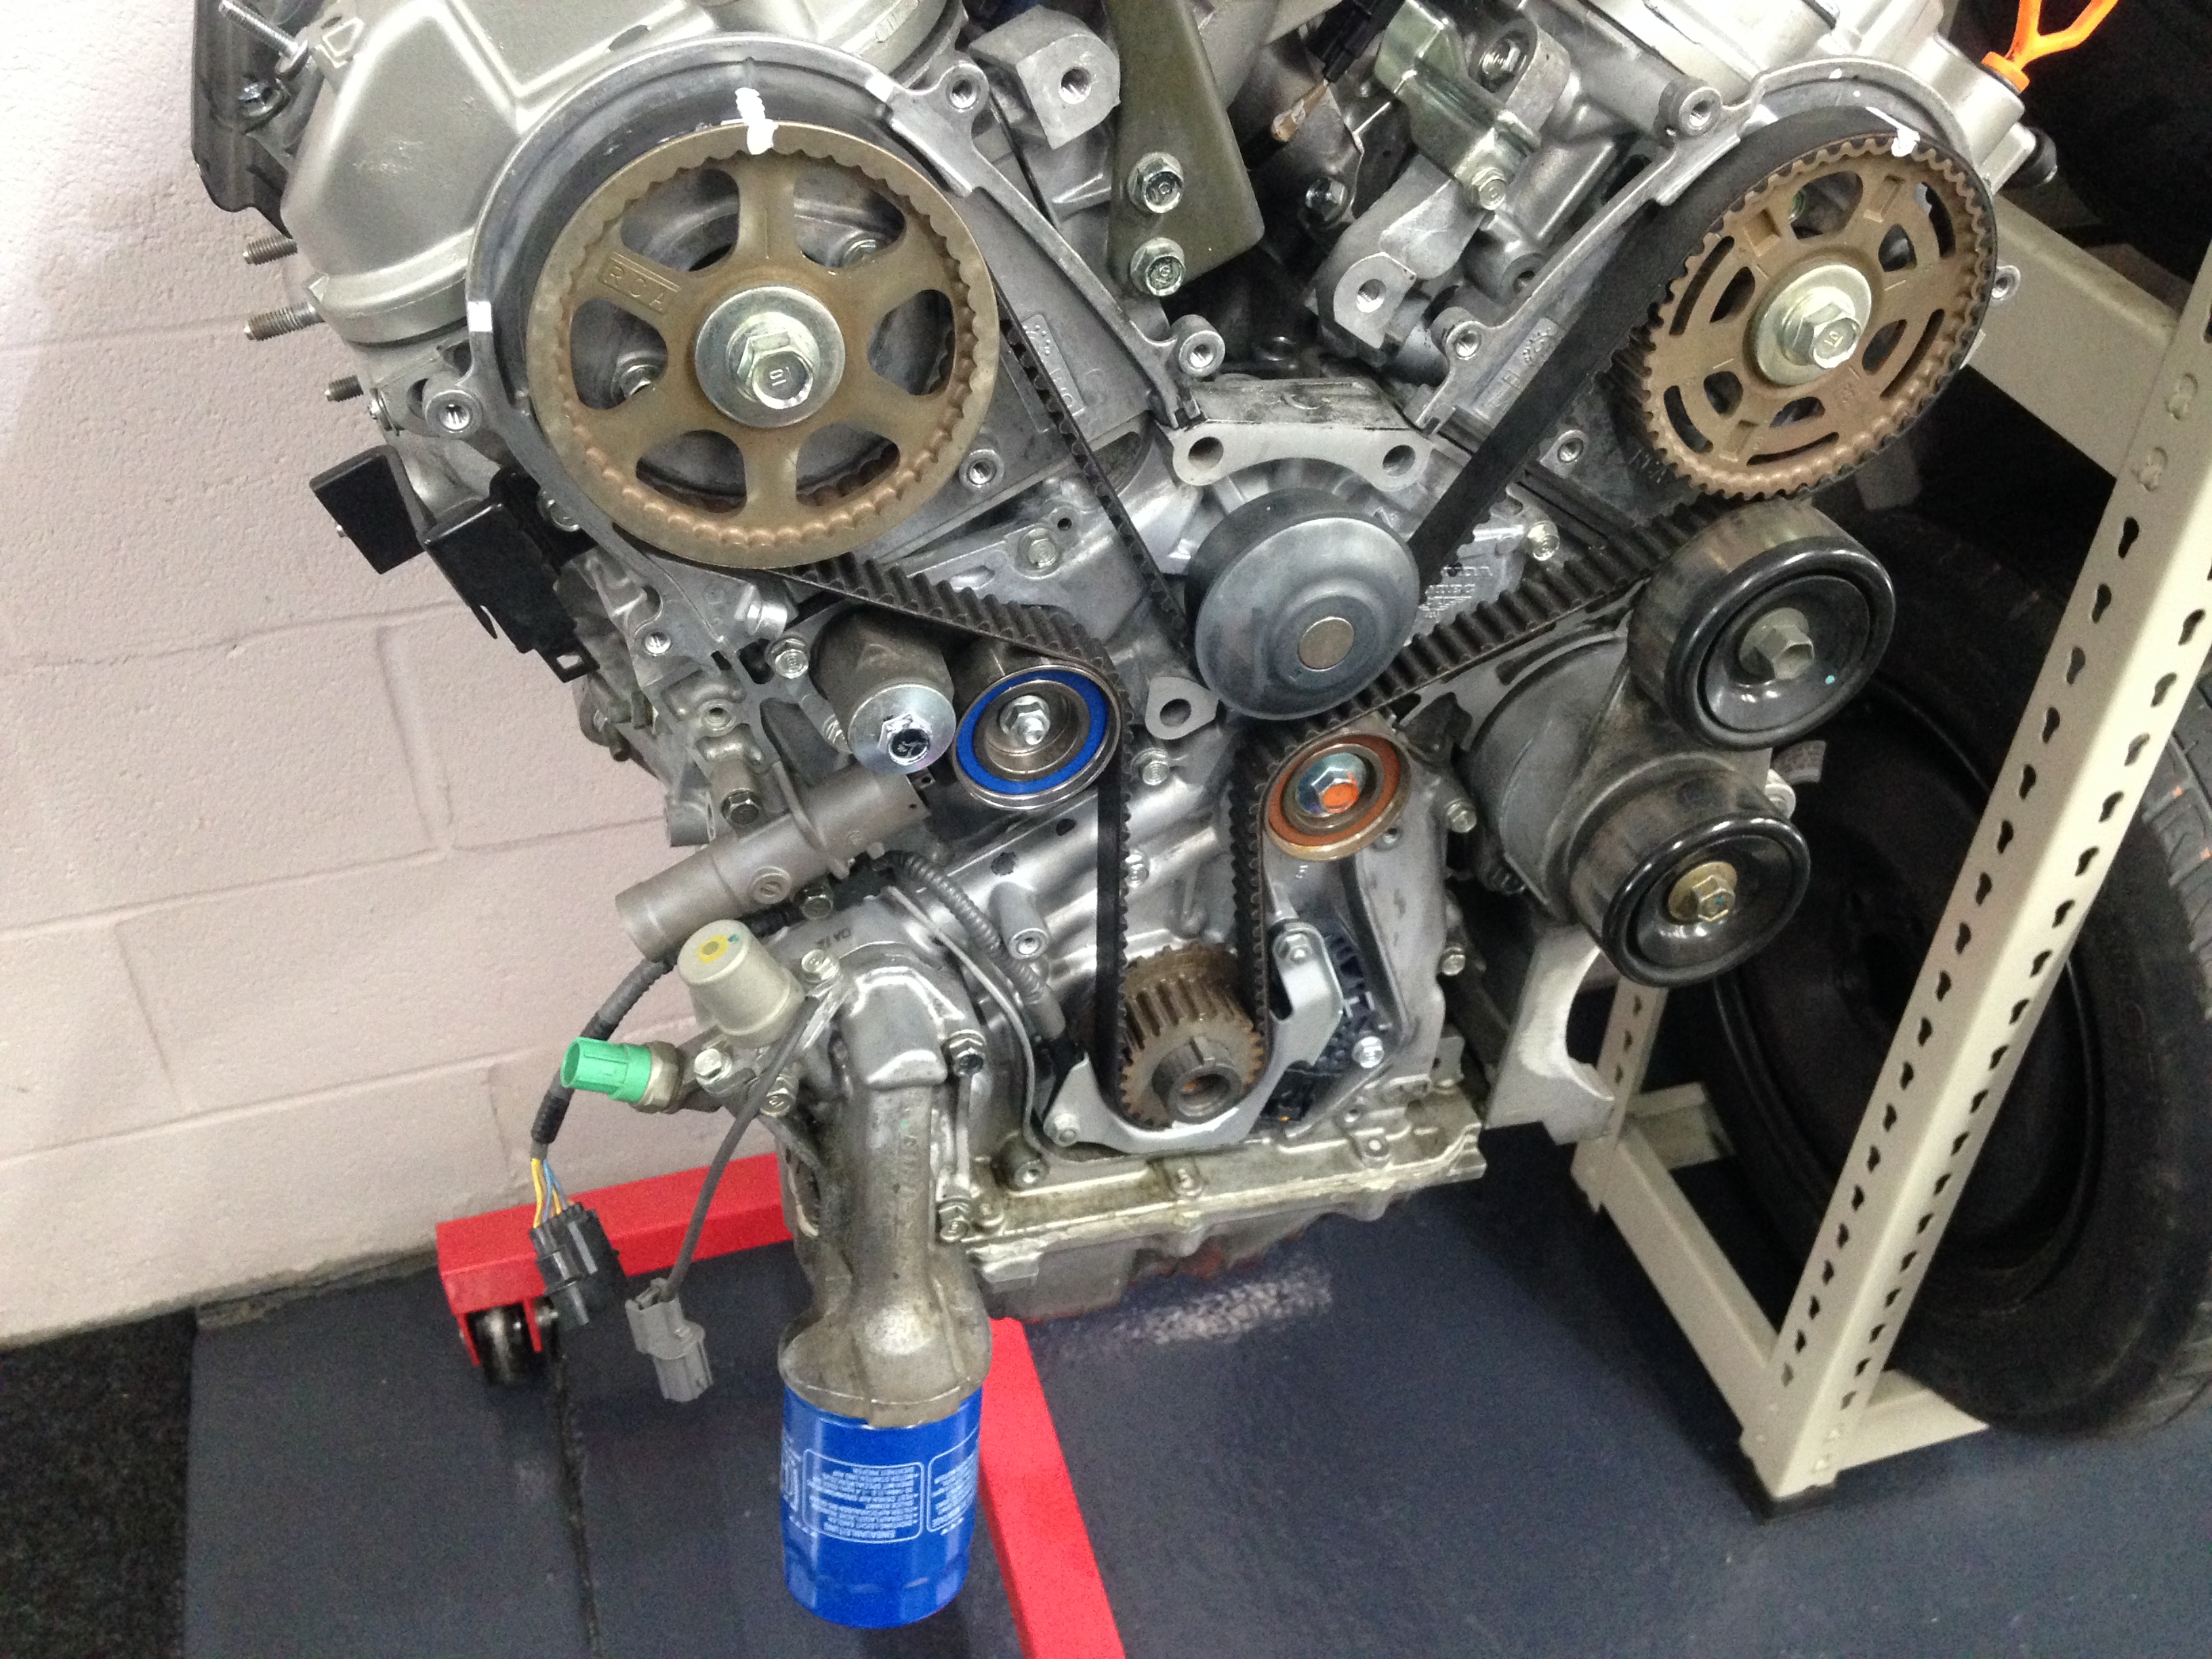 2009 honda accord timing chain replacement cost